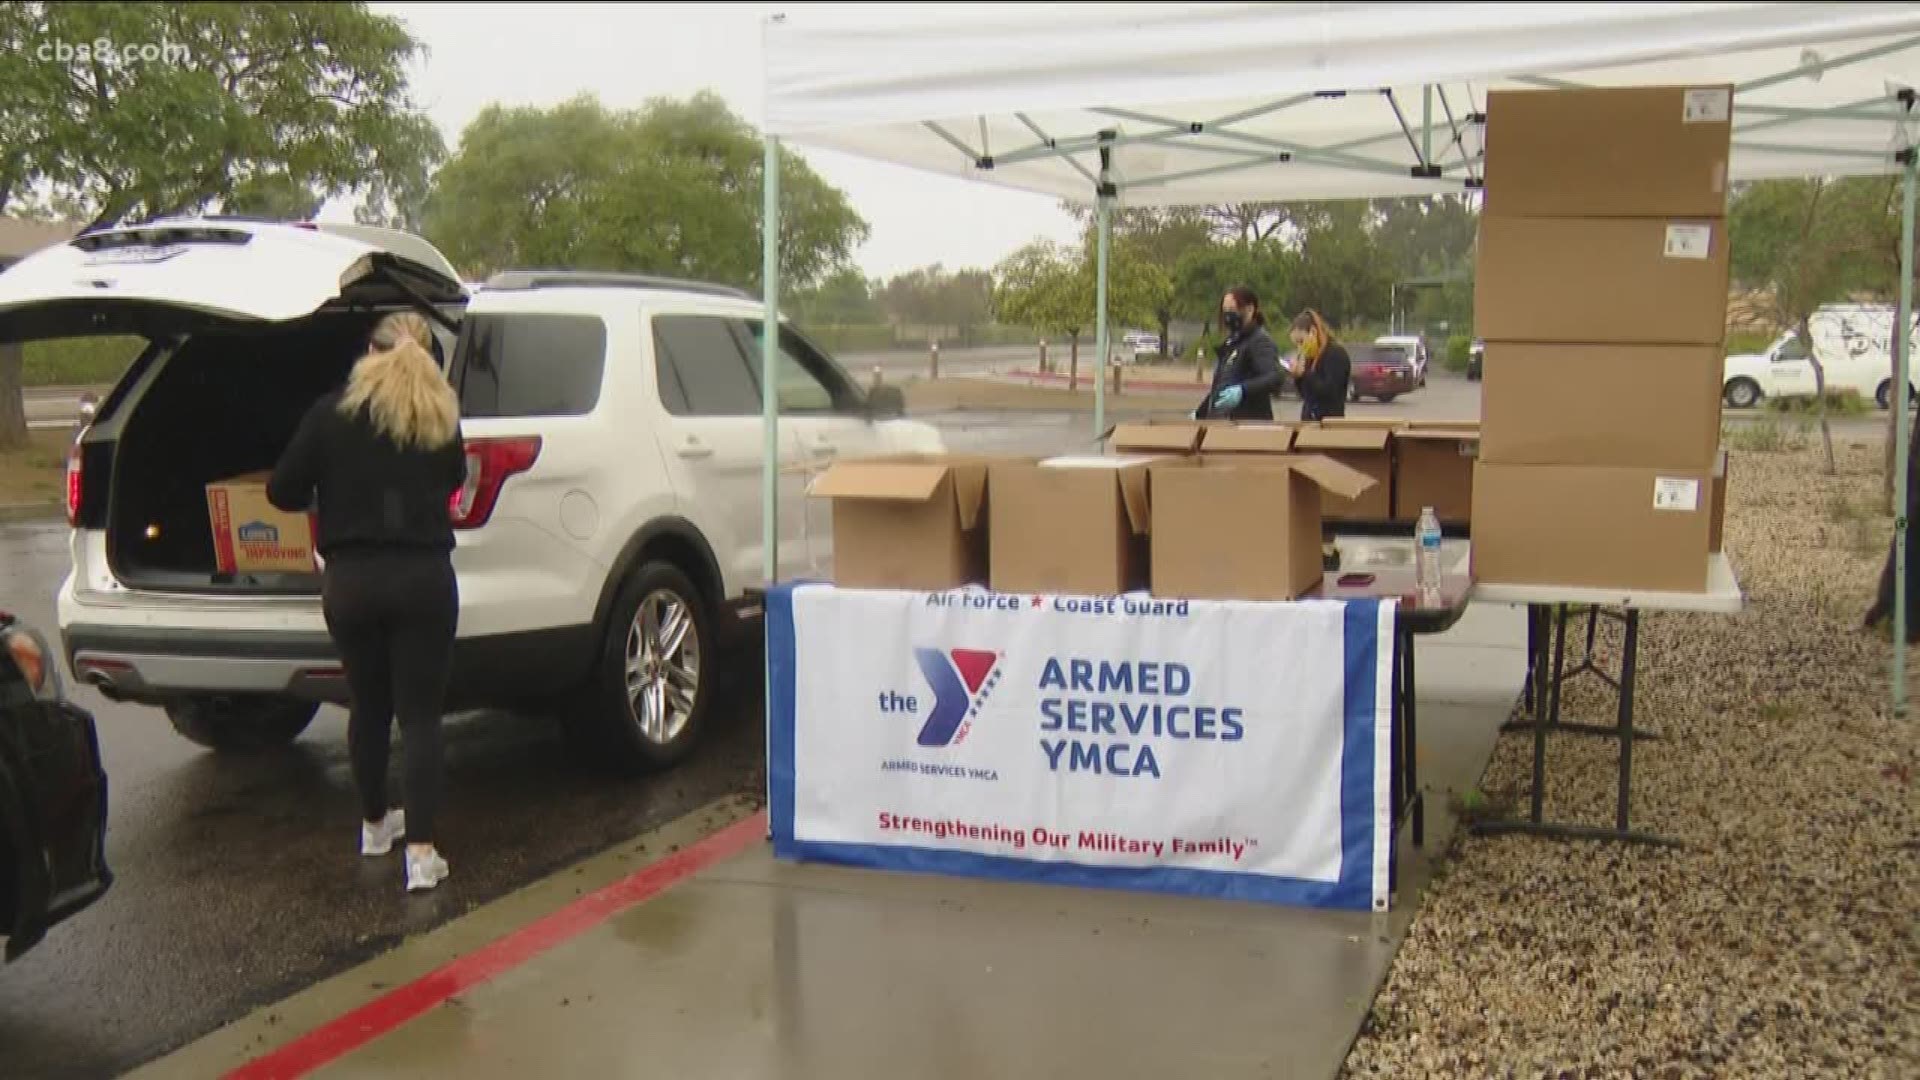 The Armed Services YMCA San Diego distributed 350 food boxes to military families via drive-thru pick-up to support social distancing on Monday.